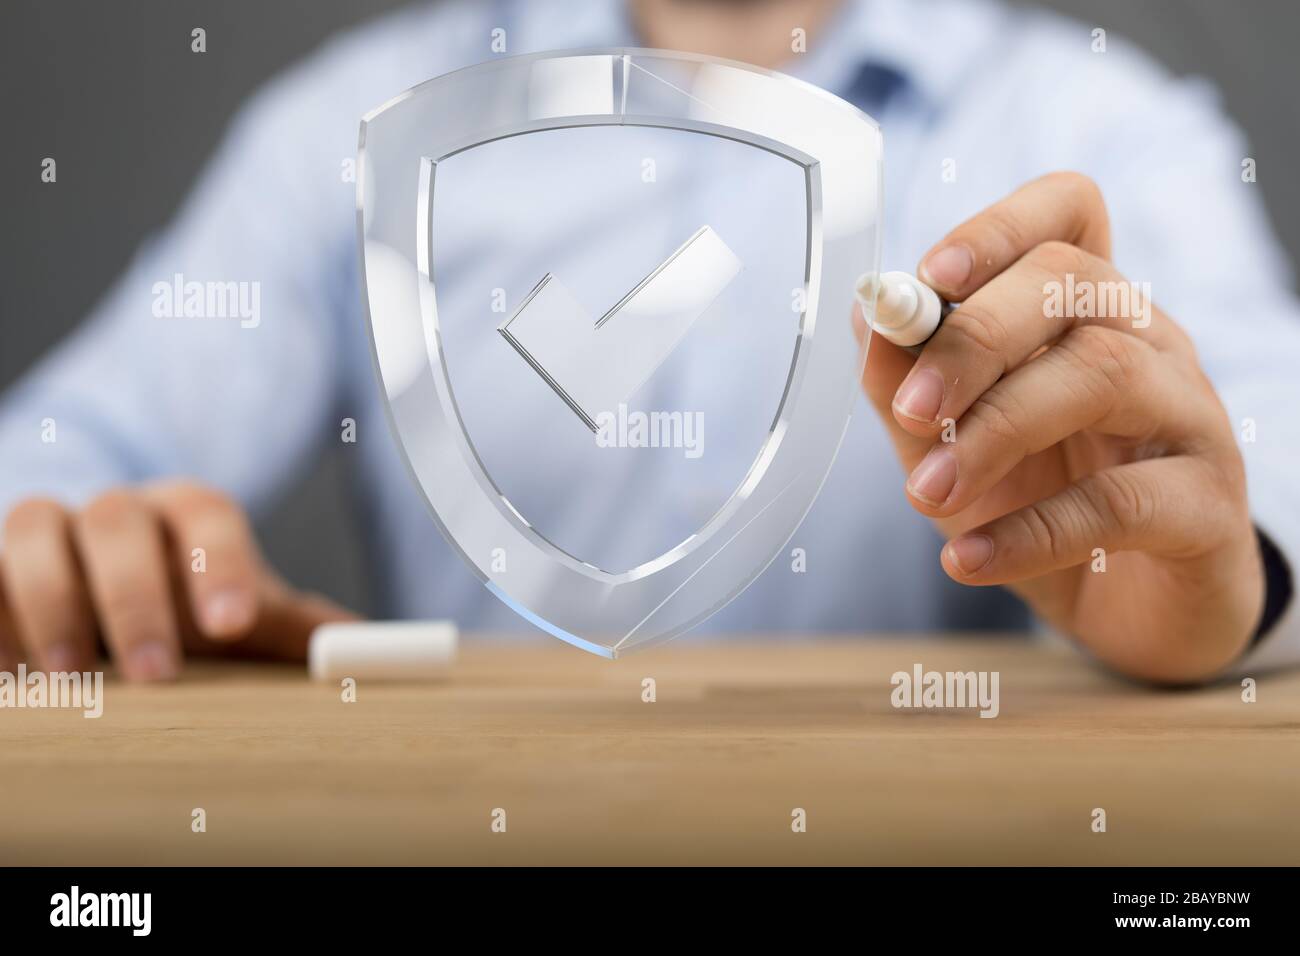 A security Stock Photo